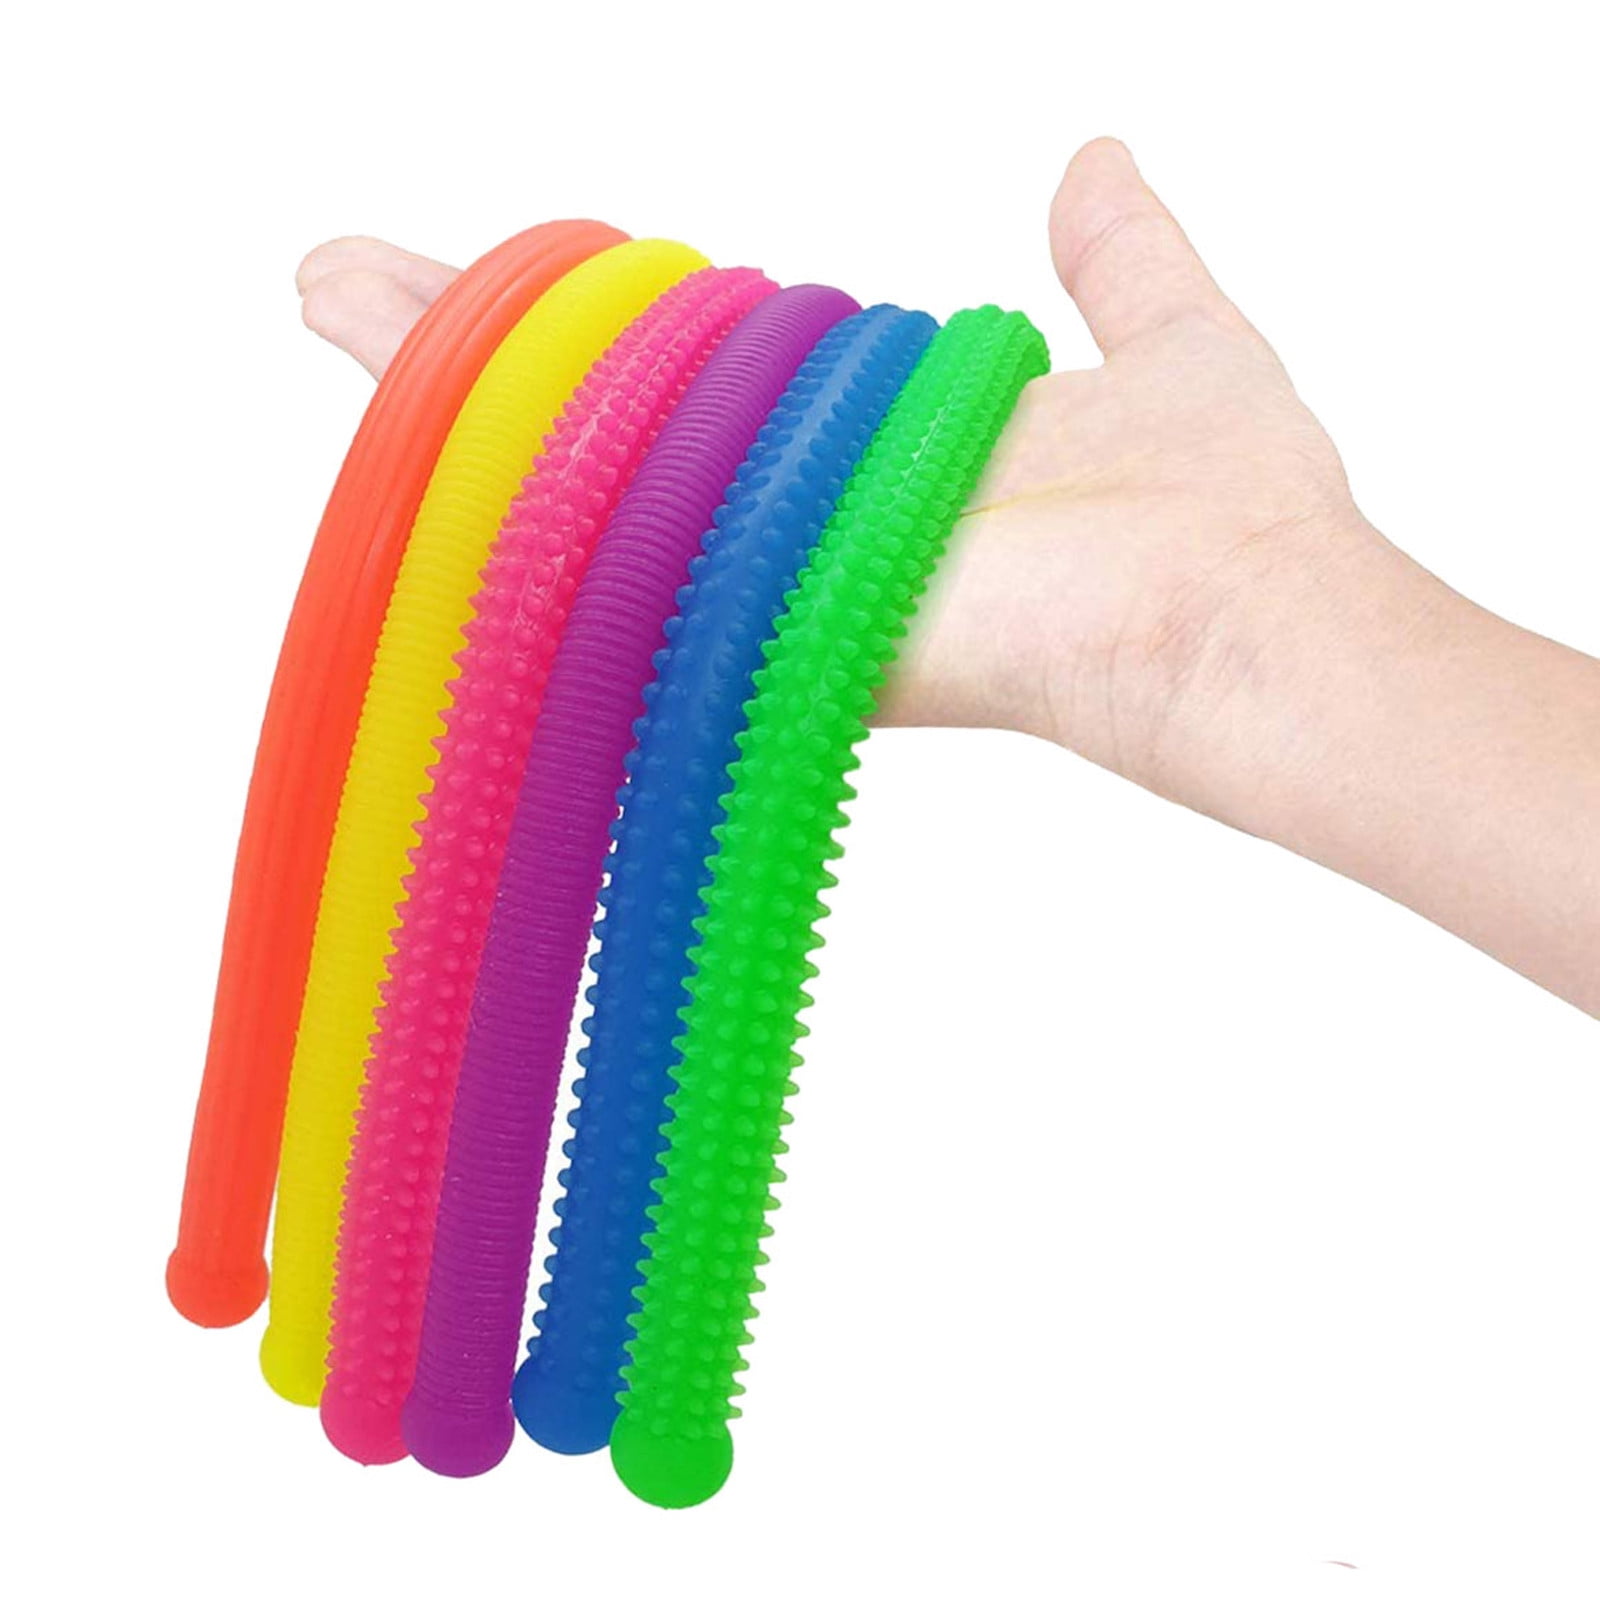 Sensory Toys 6 Pack Textured Calming Stretchy Stress and Anxiety Relief for Homeschool & Office 